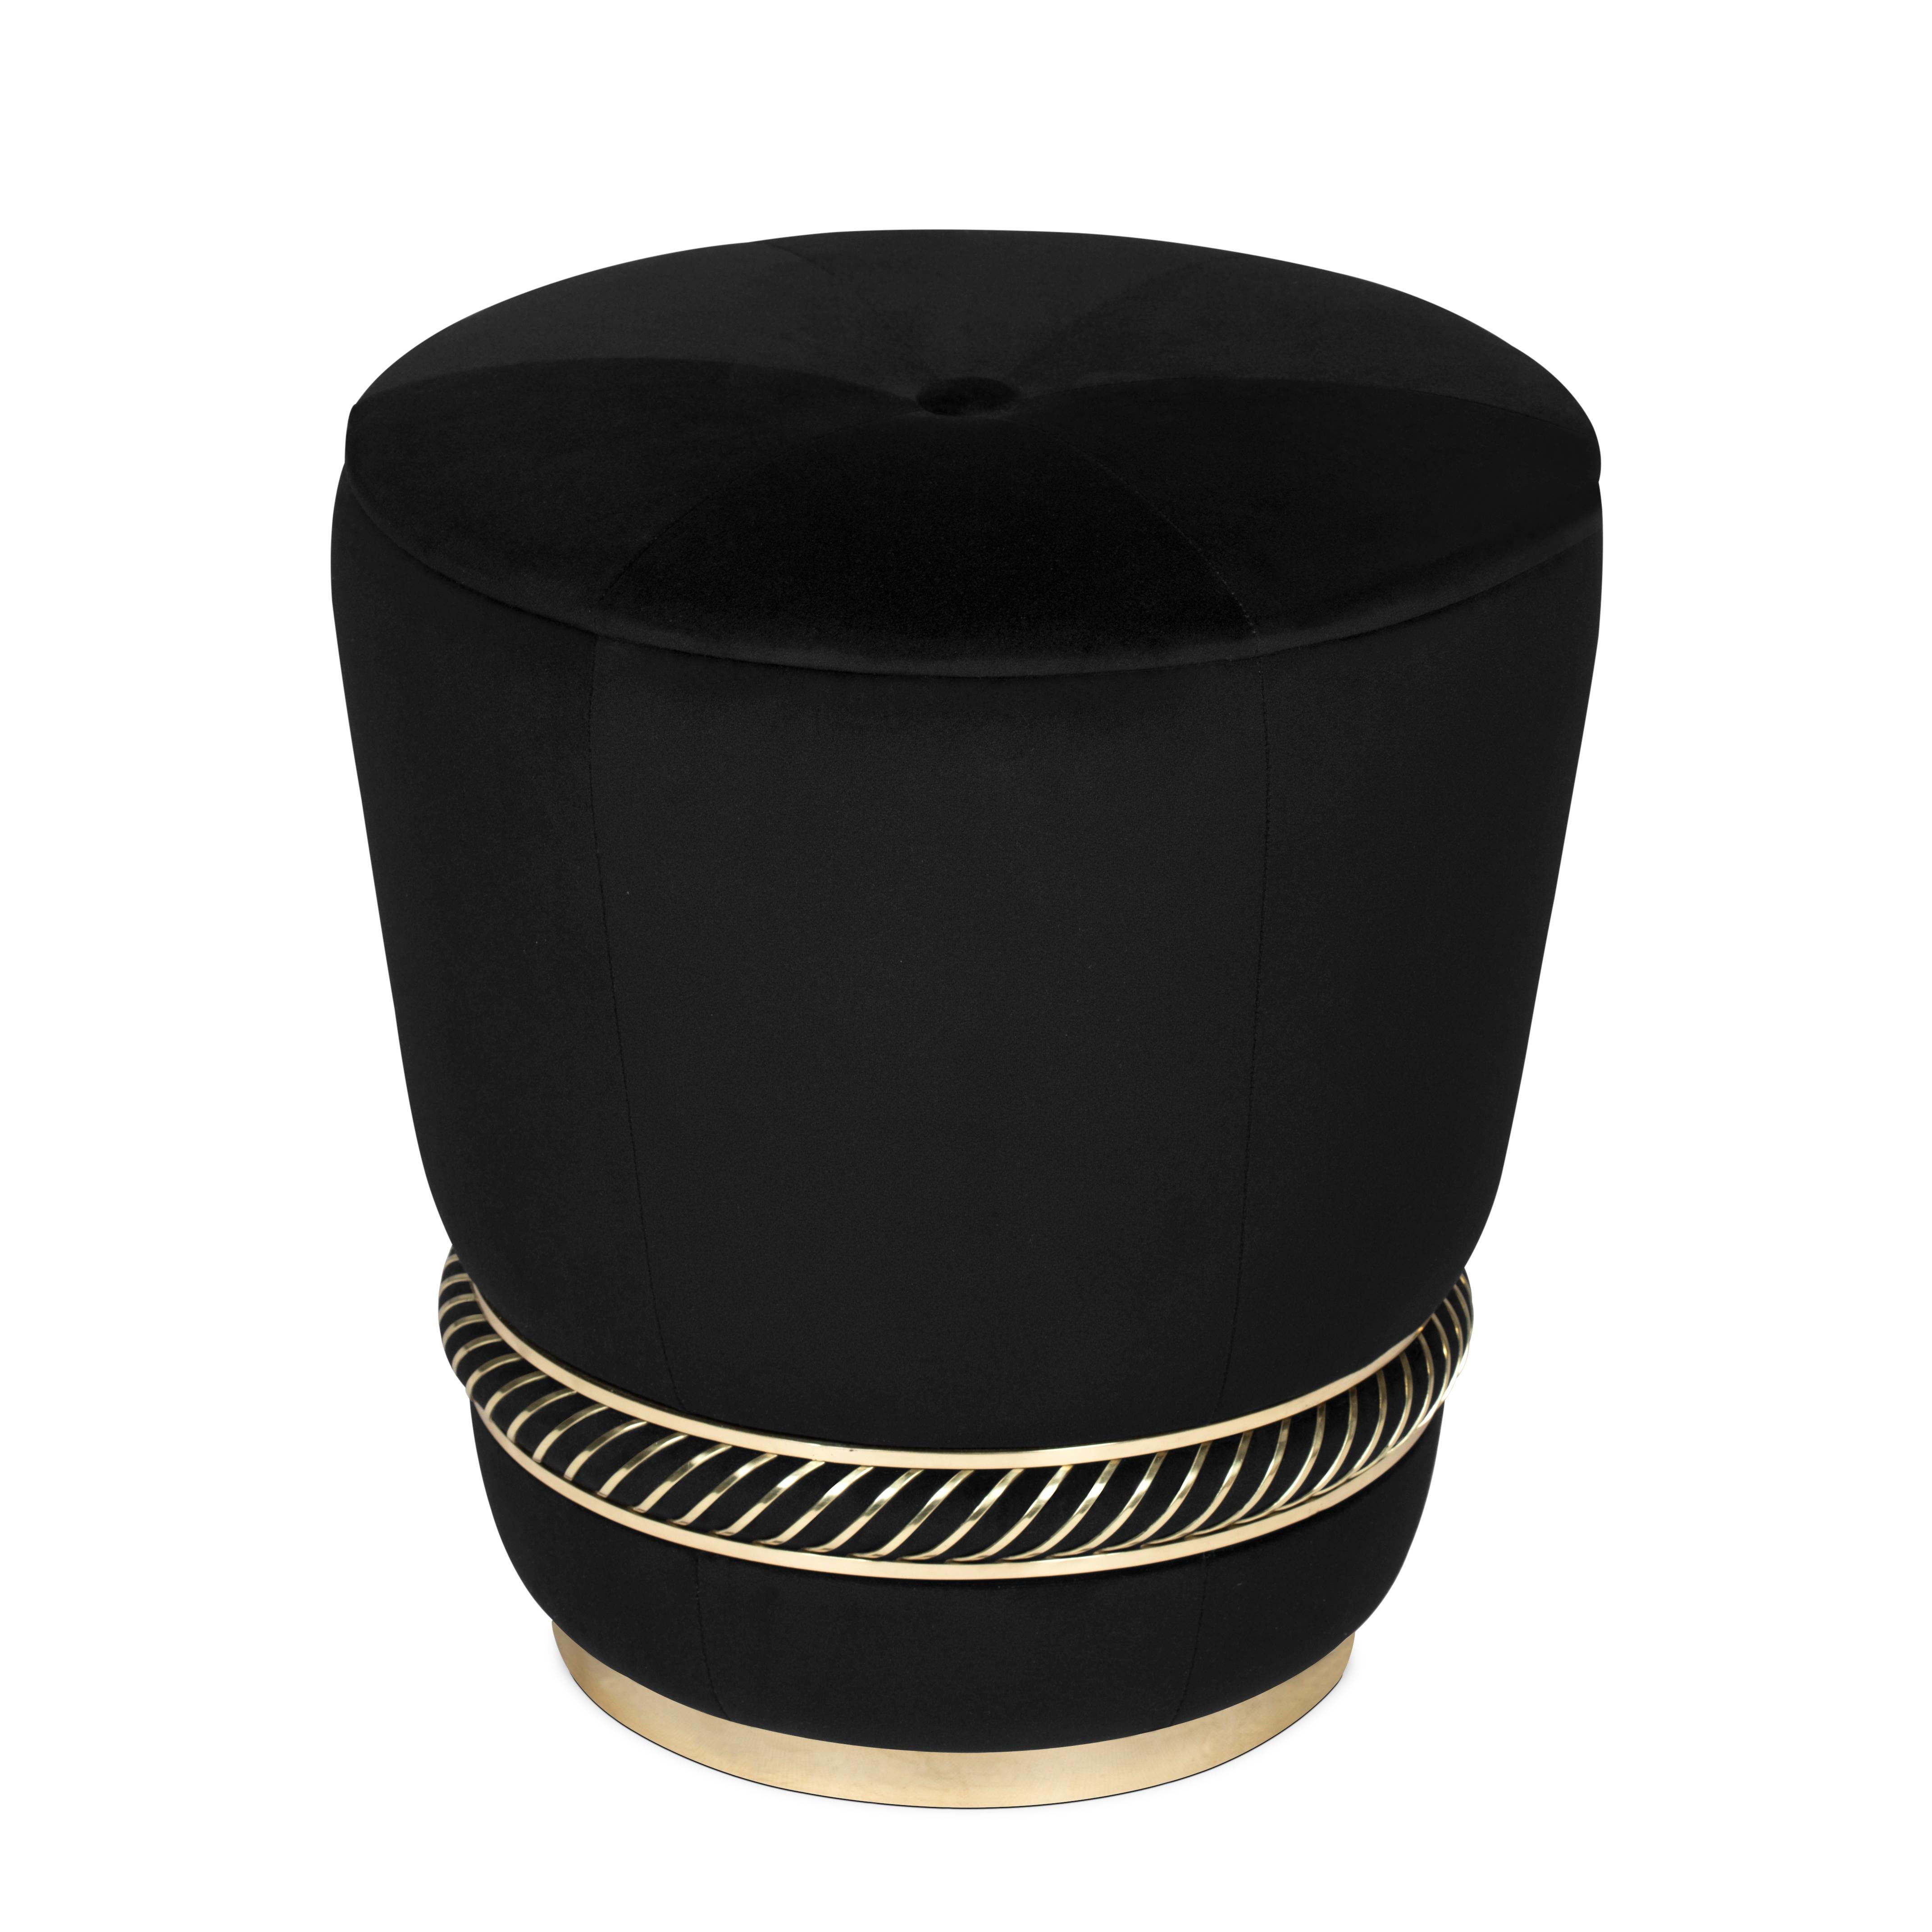 Stool Alliance with structure in solid wood,
upholstered and covered with black velvet 
fabric, with polished brass base and with 
polished brass torsaded trim above the base.